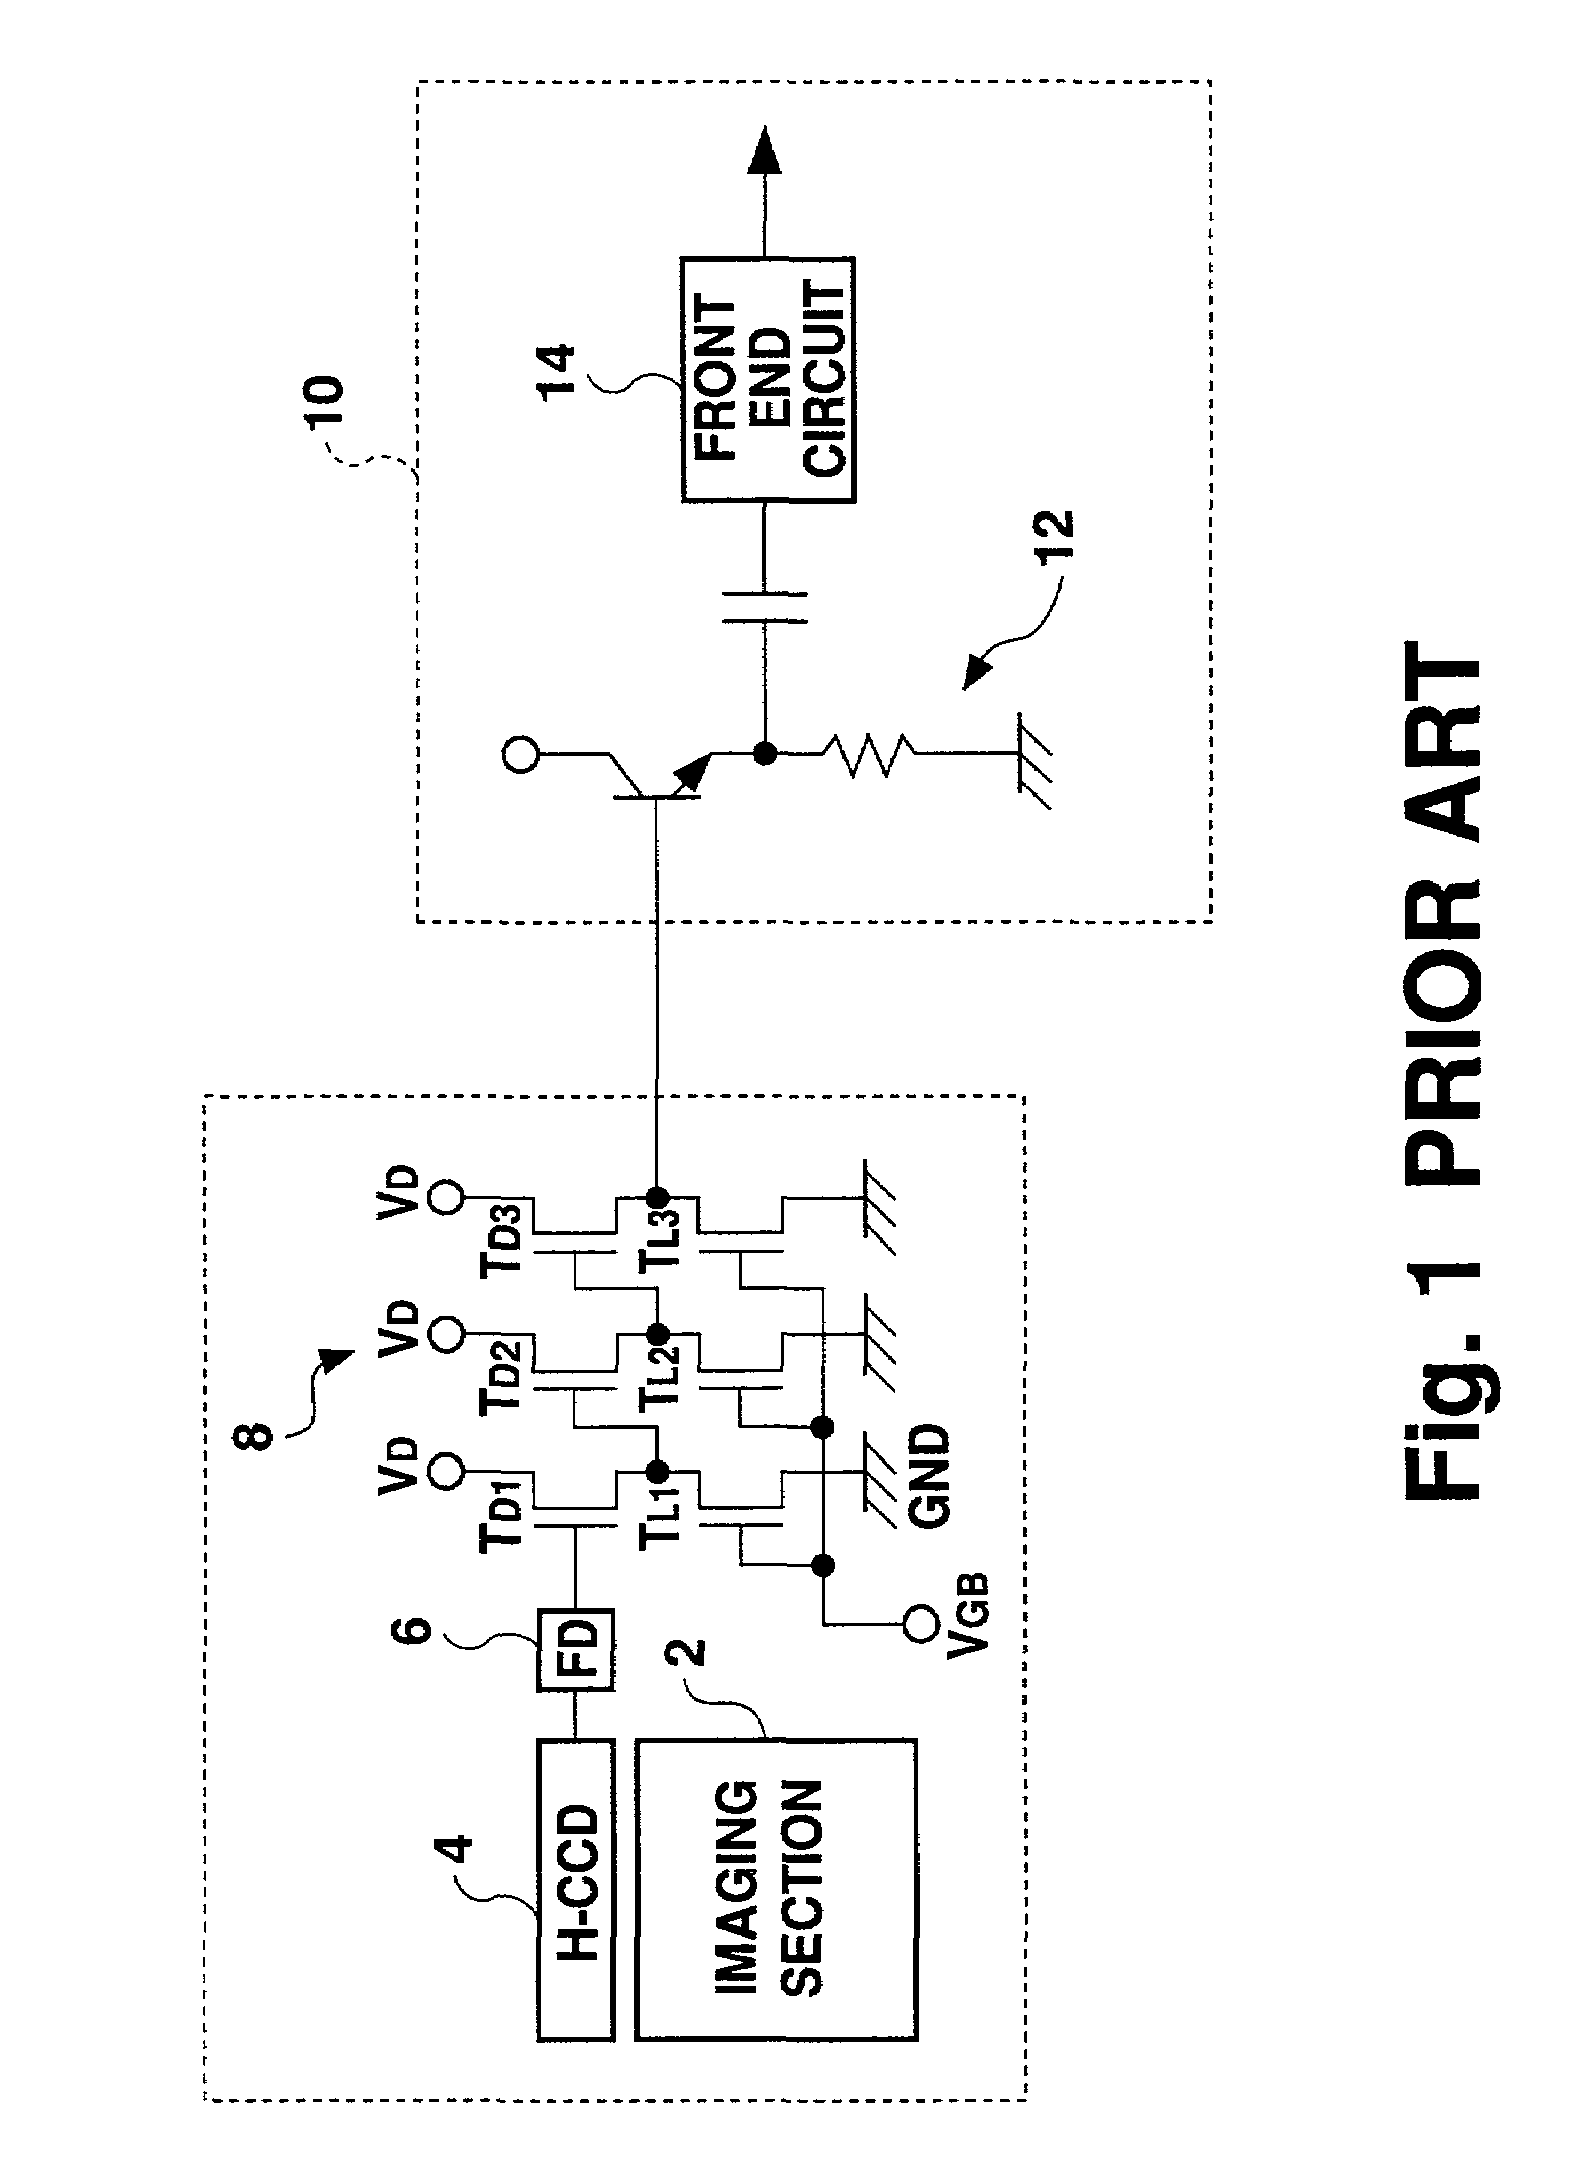 Charge transfer device